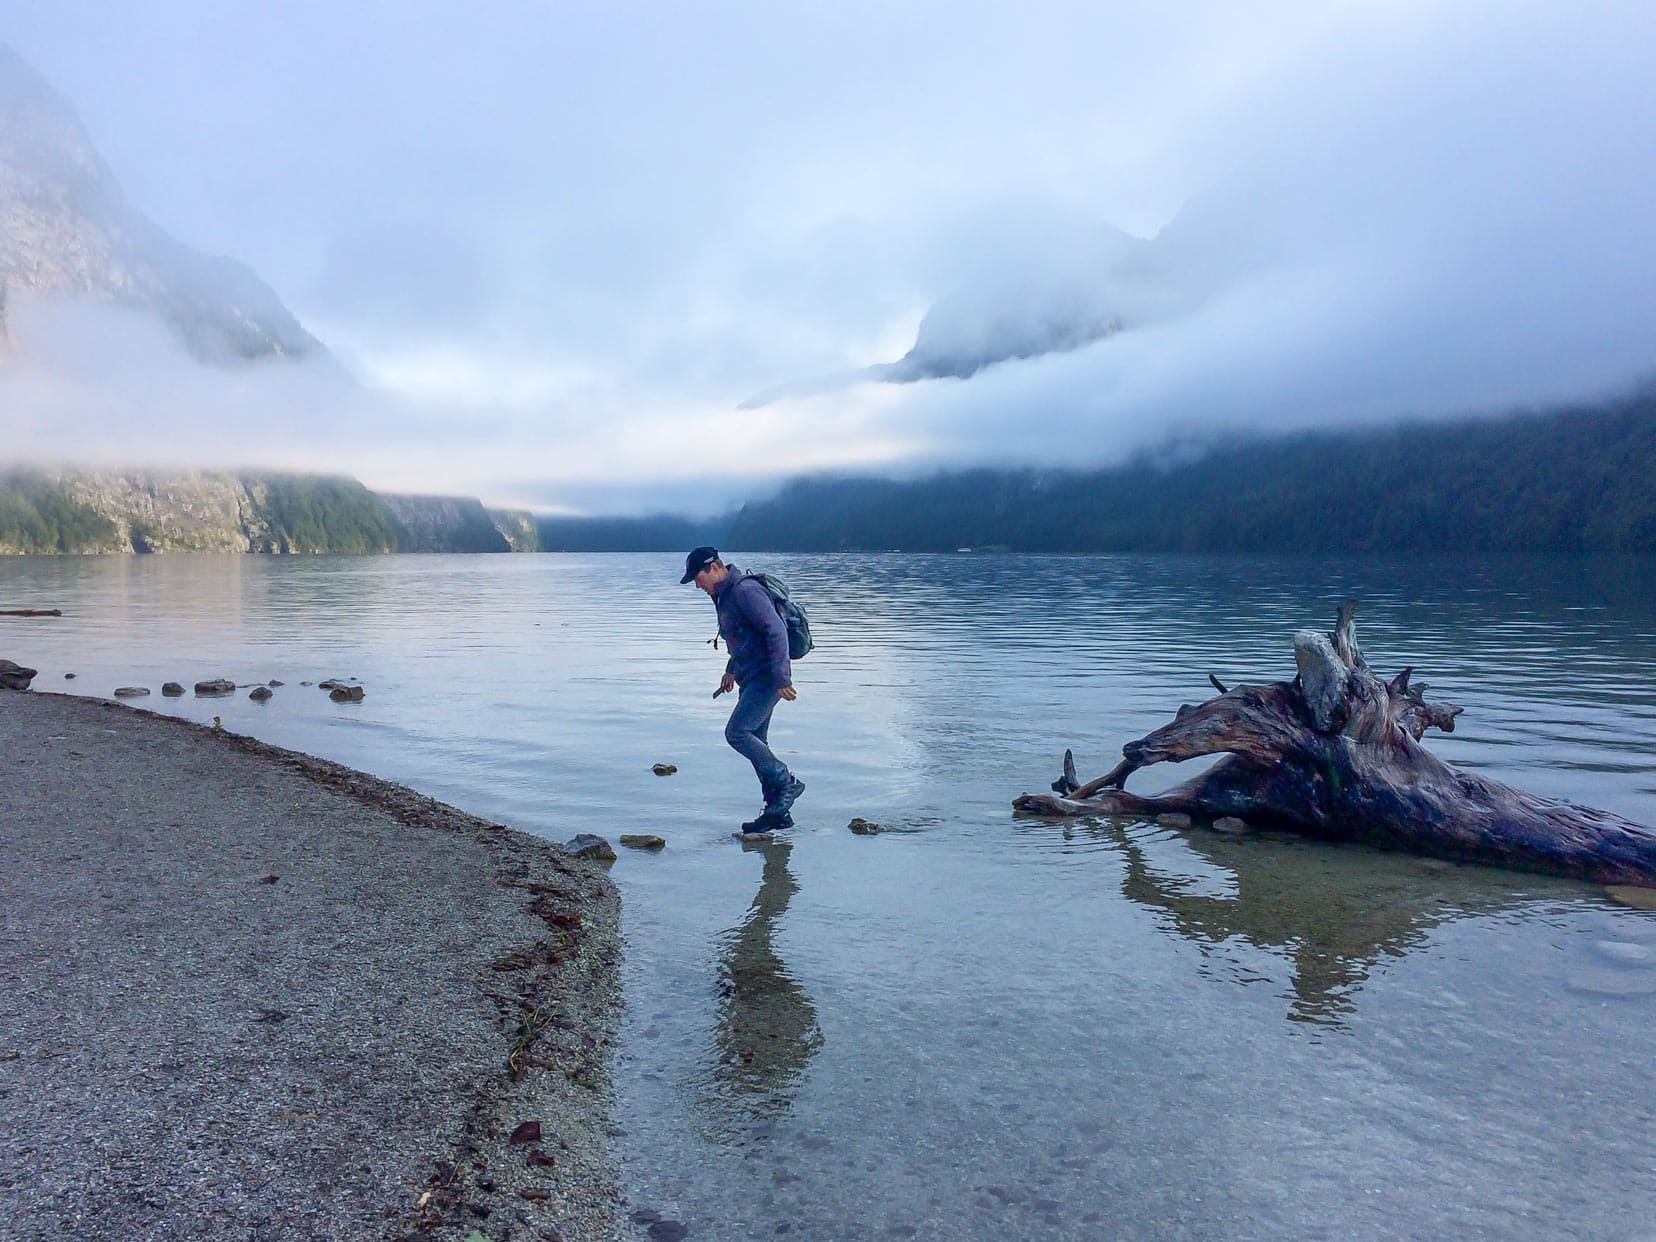 Lars jumping on stepping stones om a river away from an old log with mountains, trees and fog in the distance.